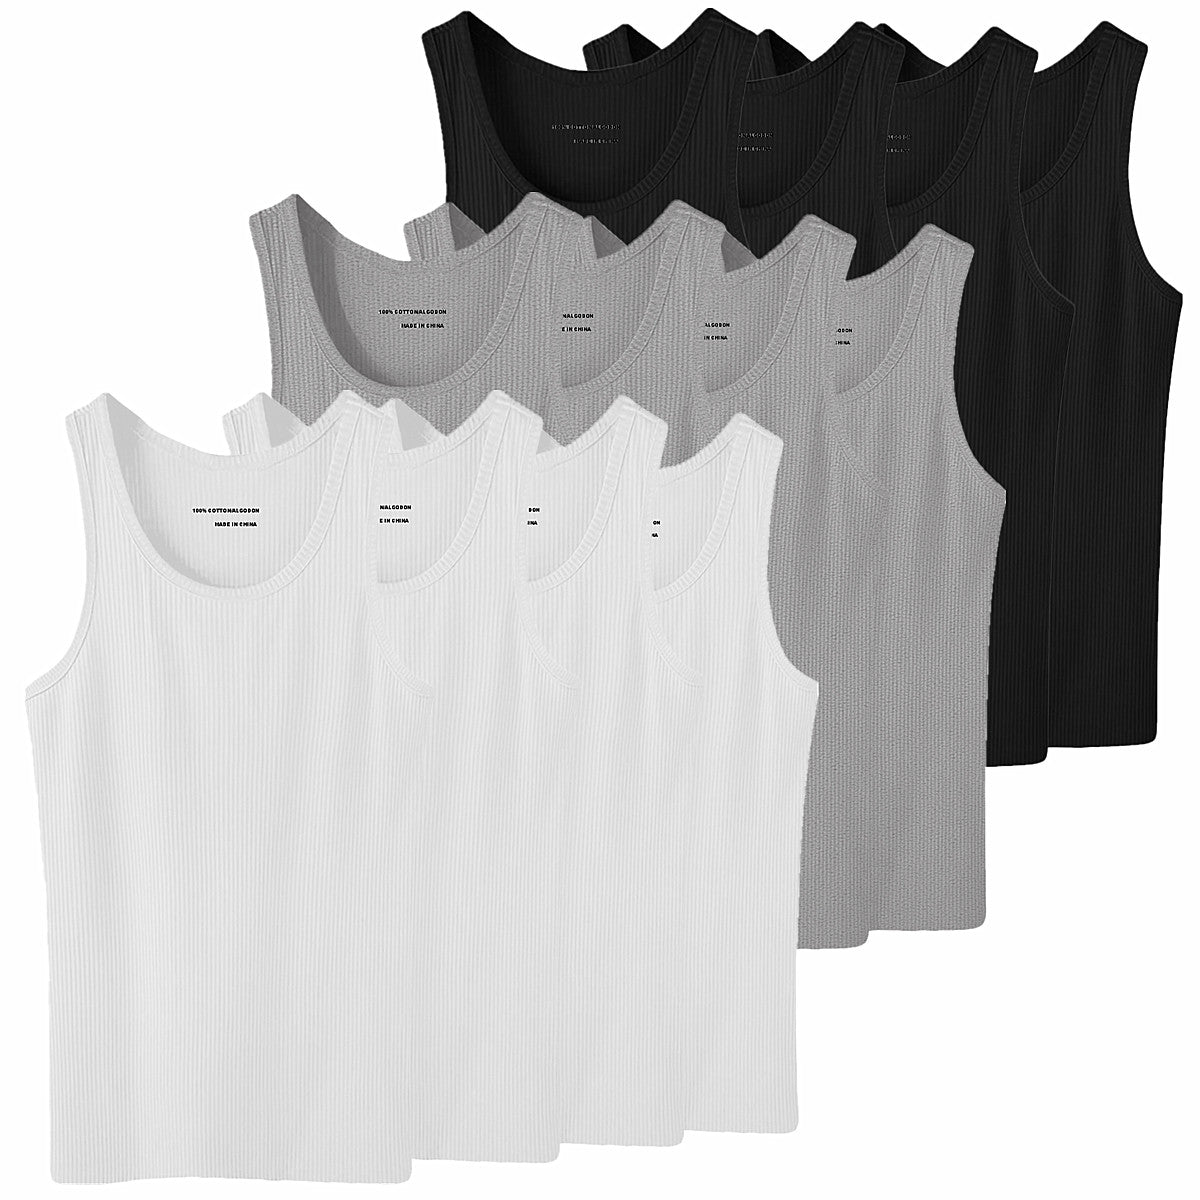 Tank Top, Wife Beater, Muscle Shirt, Undershirt, Athletes, Sports